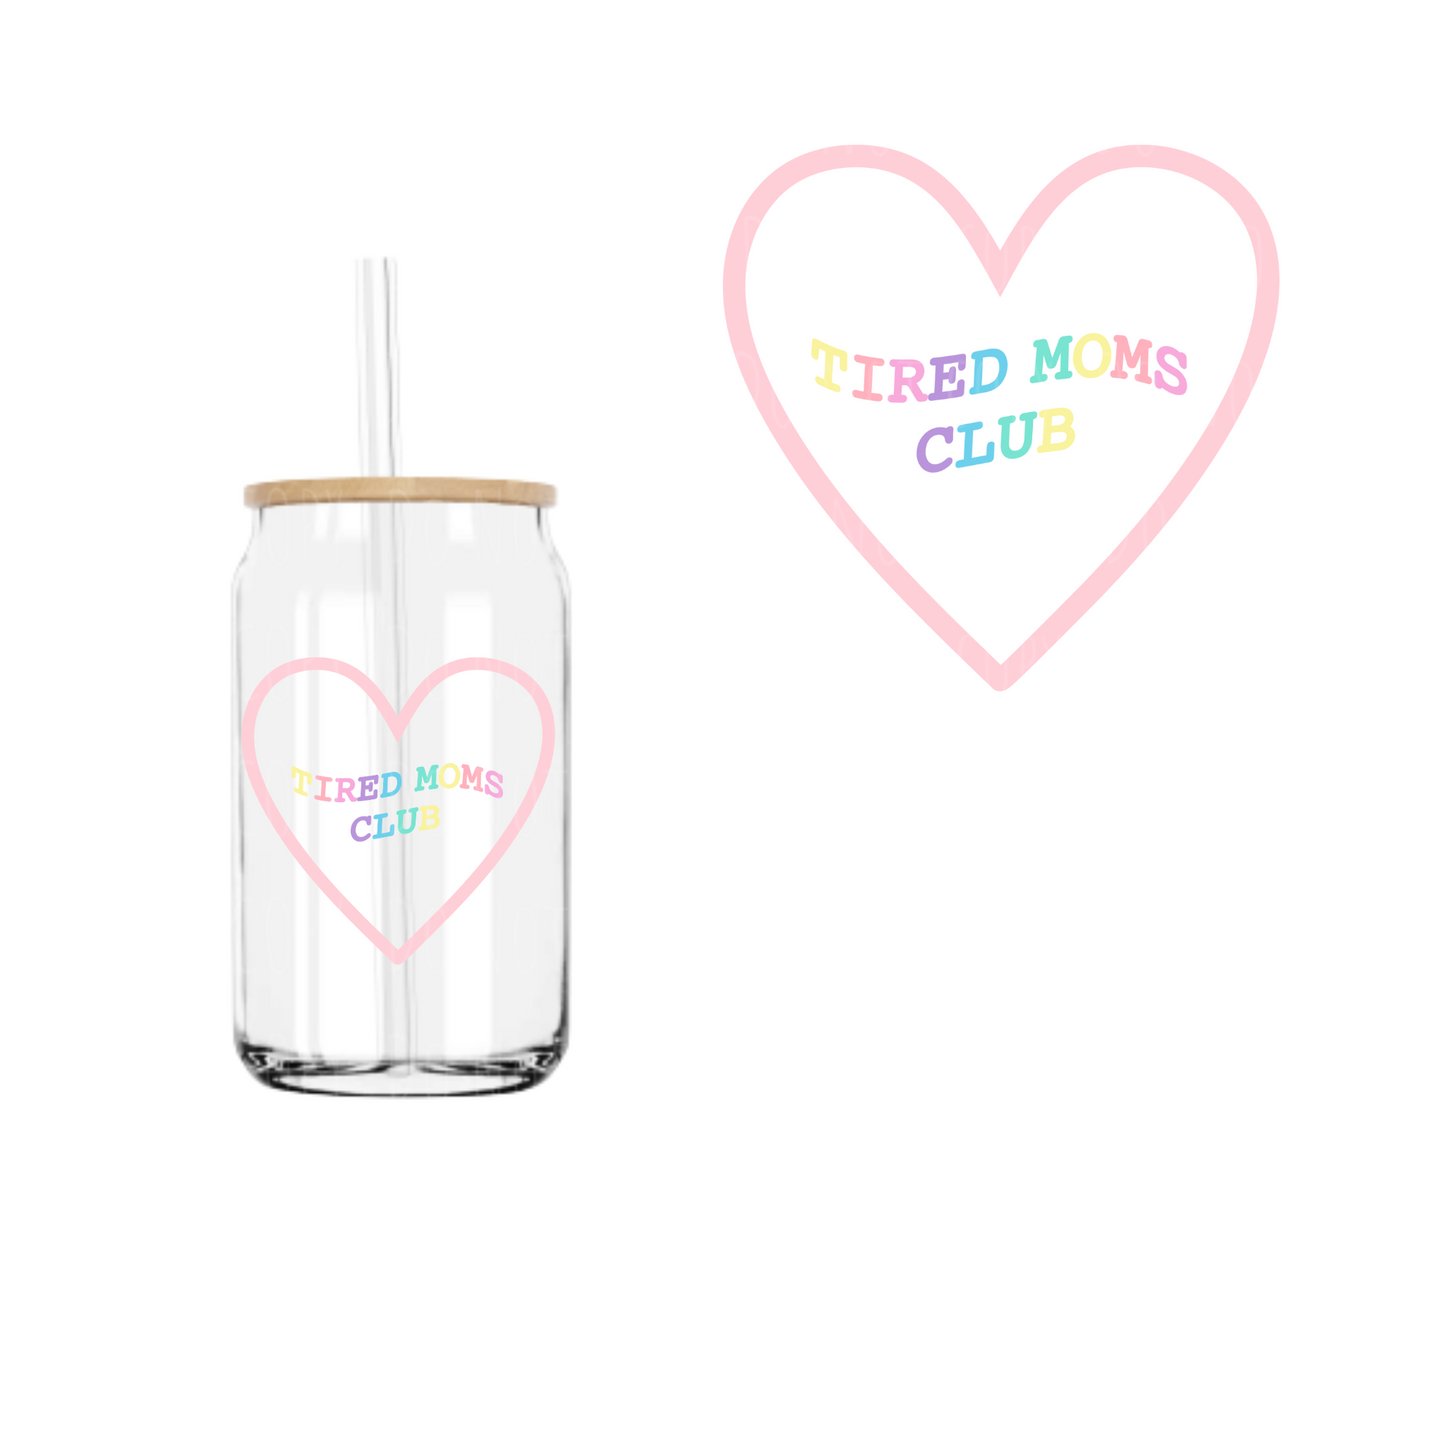 Tired Moms Club UVDTF decal